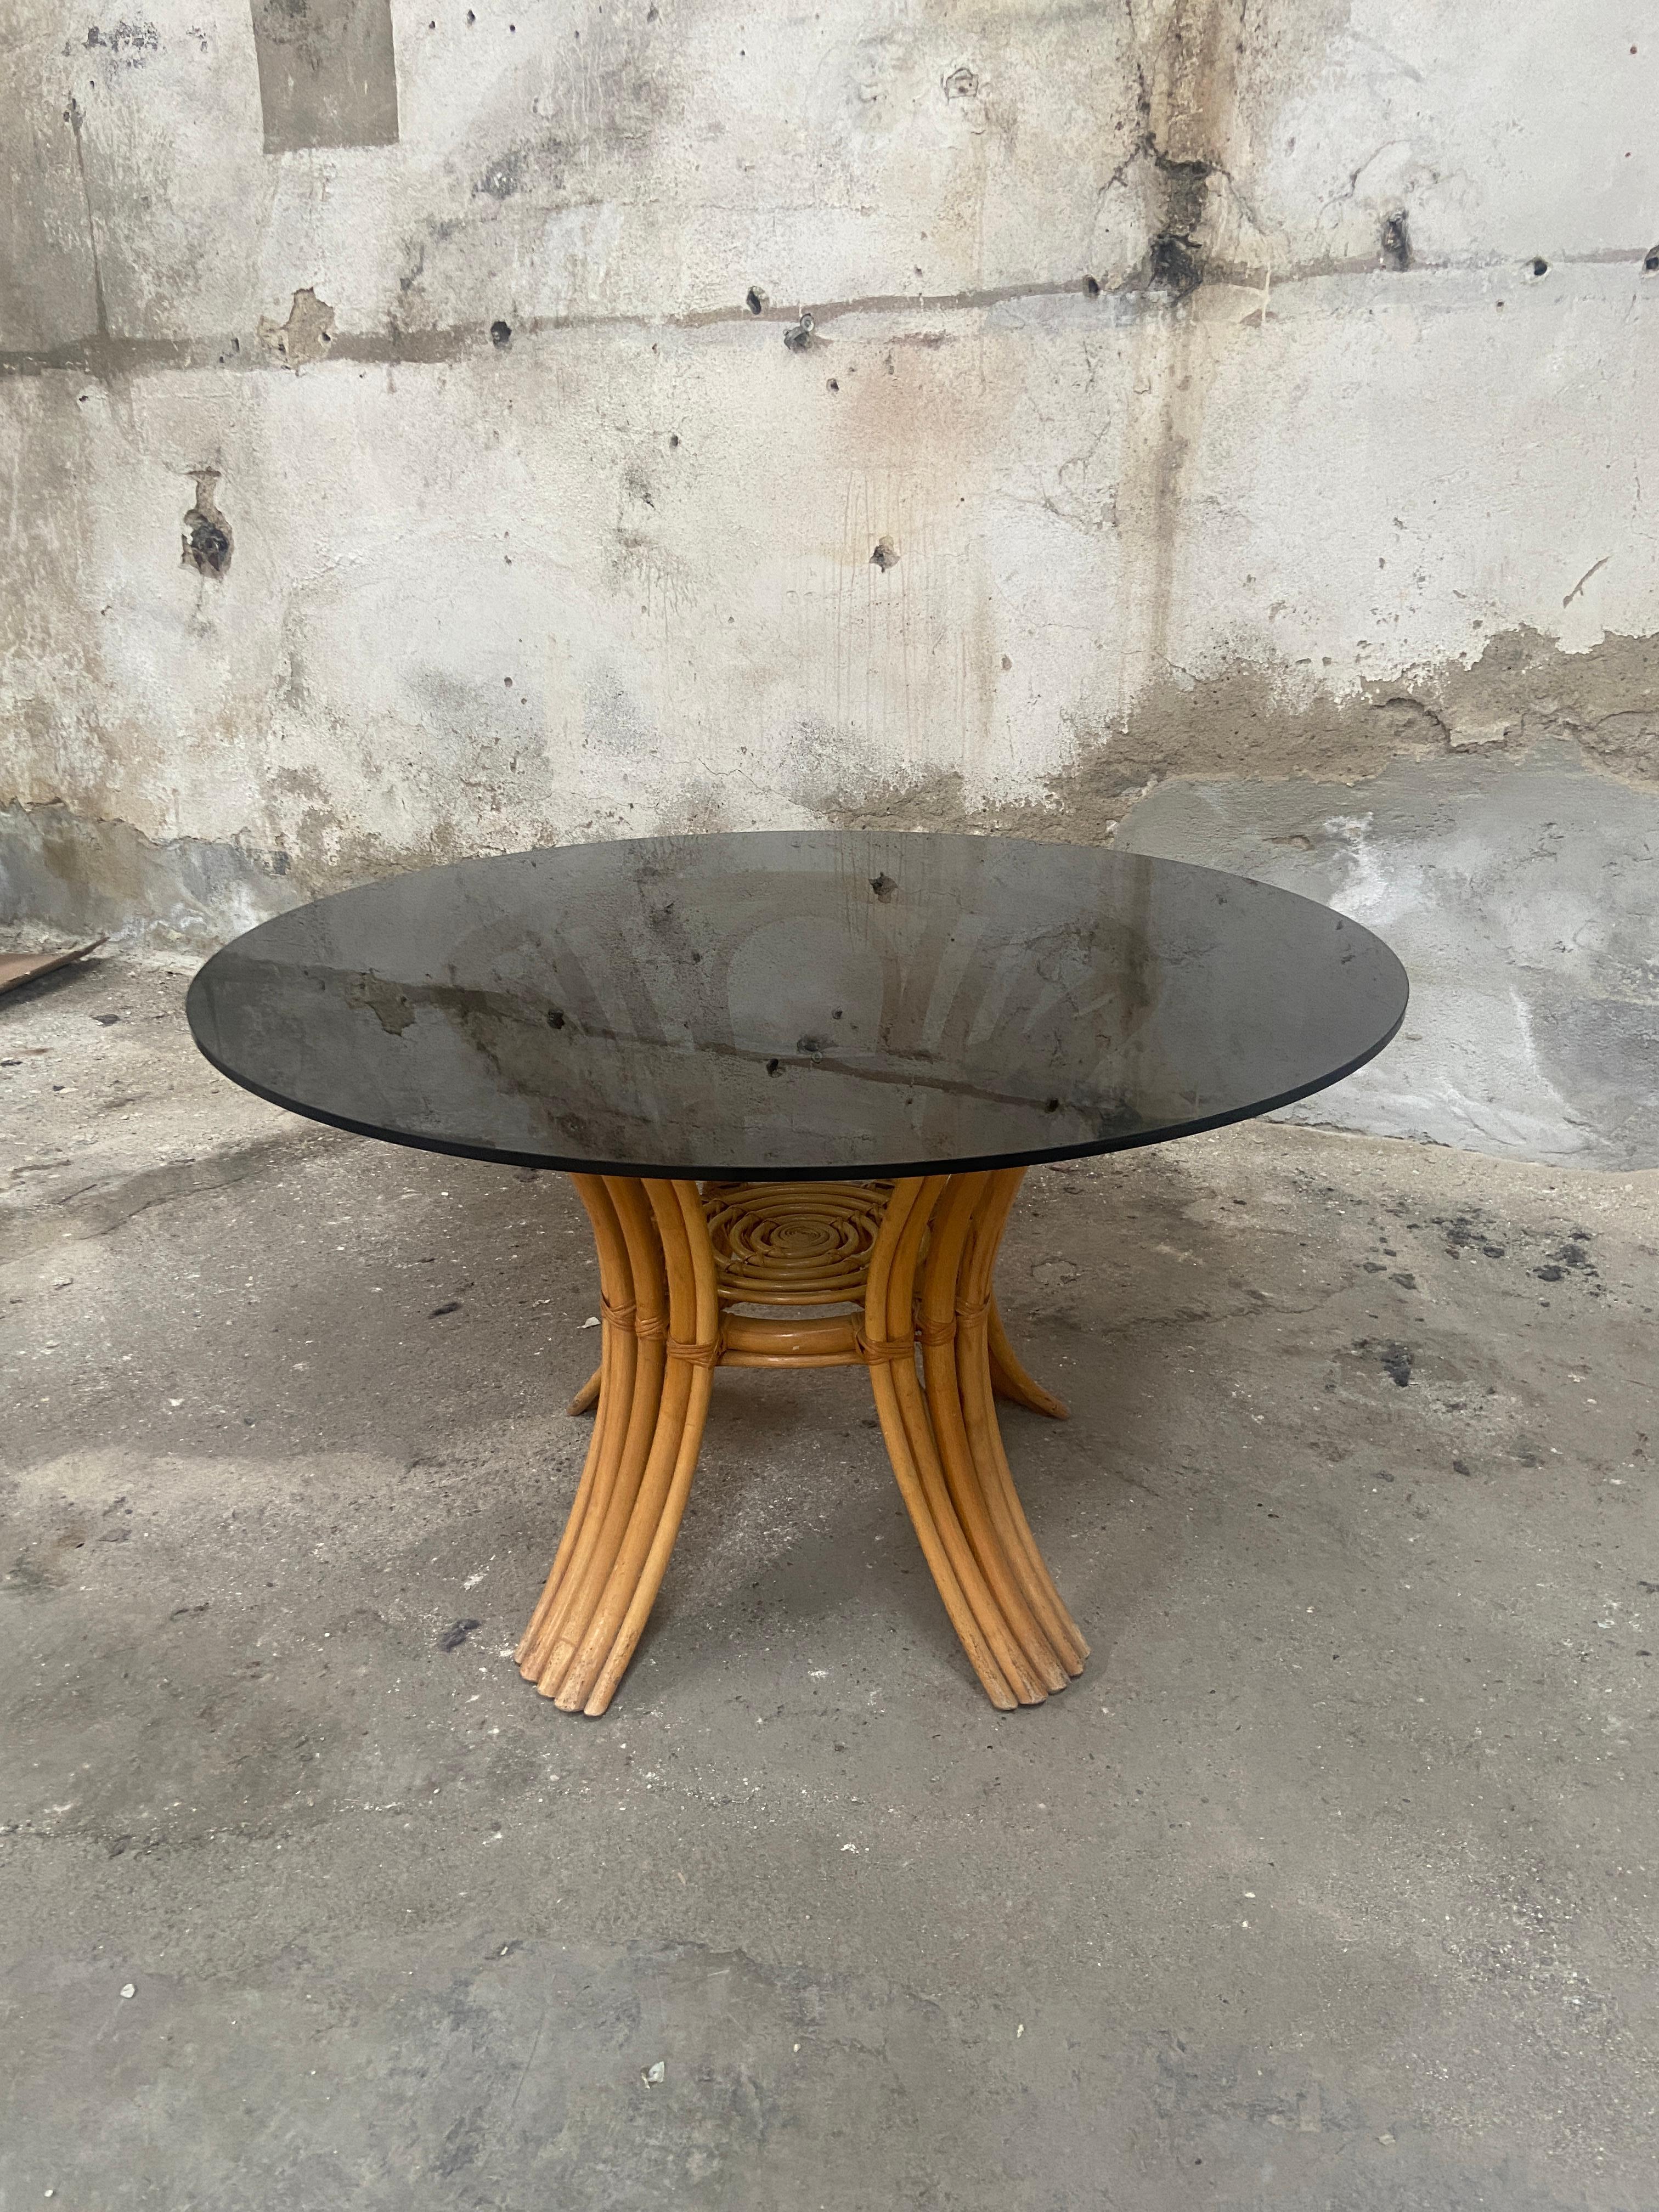 Late 20th Century Mid-Cenruty Modern Italian Bamboo Table with Smoked Glass Top, 1970s For Sale